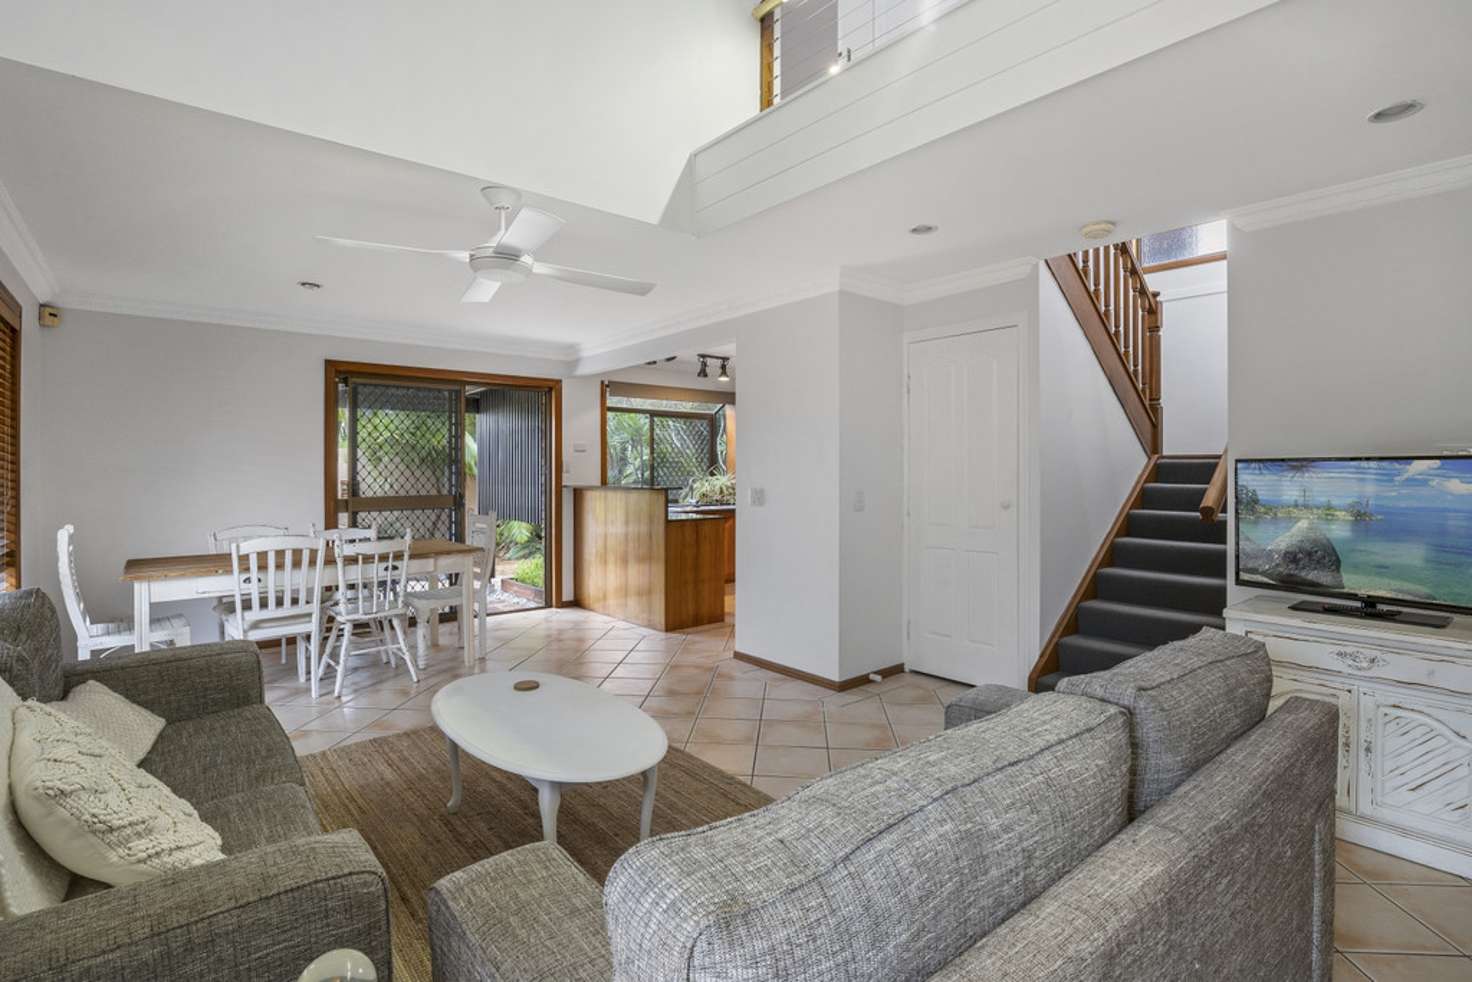 Main view of Homely house listing, 1/42 Heron Ave, Mermaid Beach QLD 4218